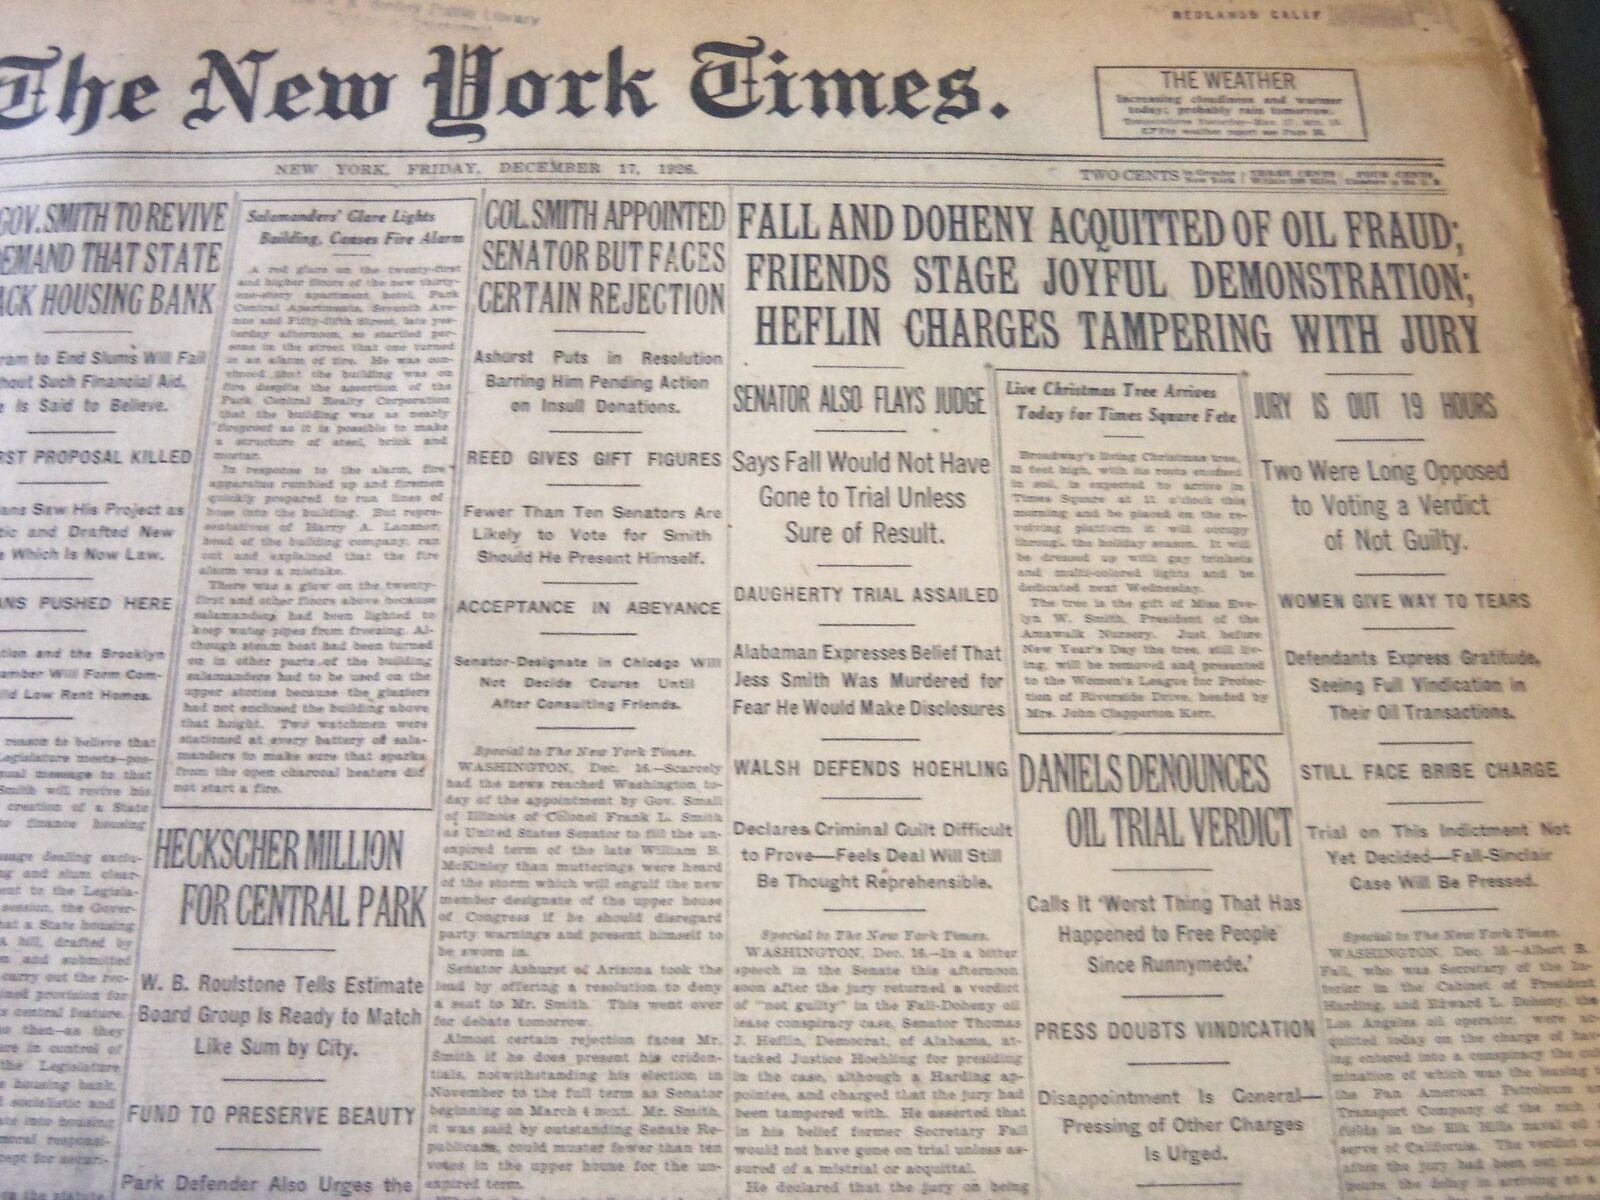 1926 DEC 17 NEW YORK TIMES - FALL & DOHENY ACQUITTED LANDIS RE-HIRED - NT 6541